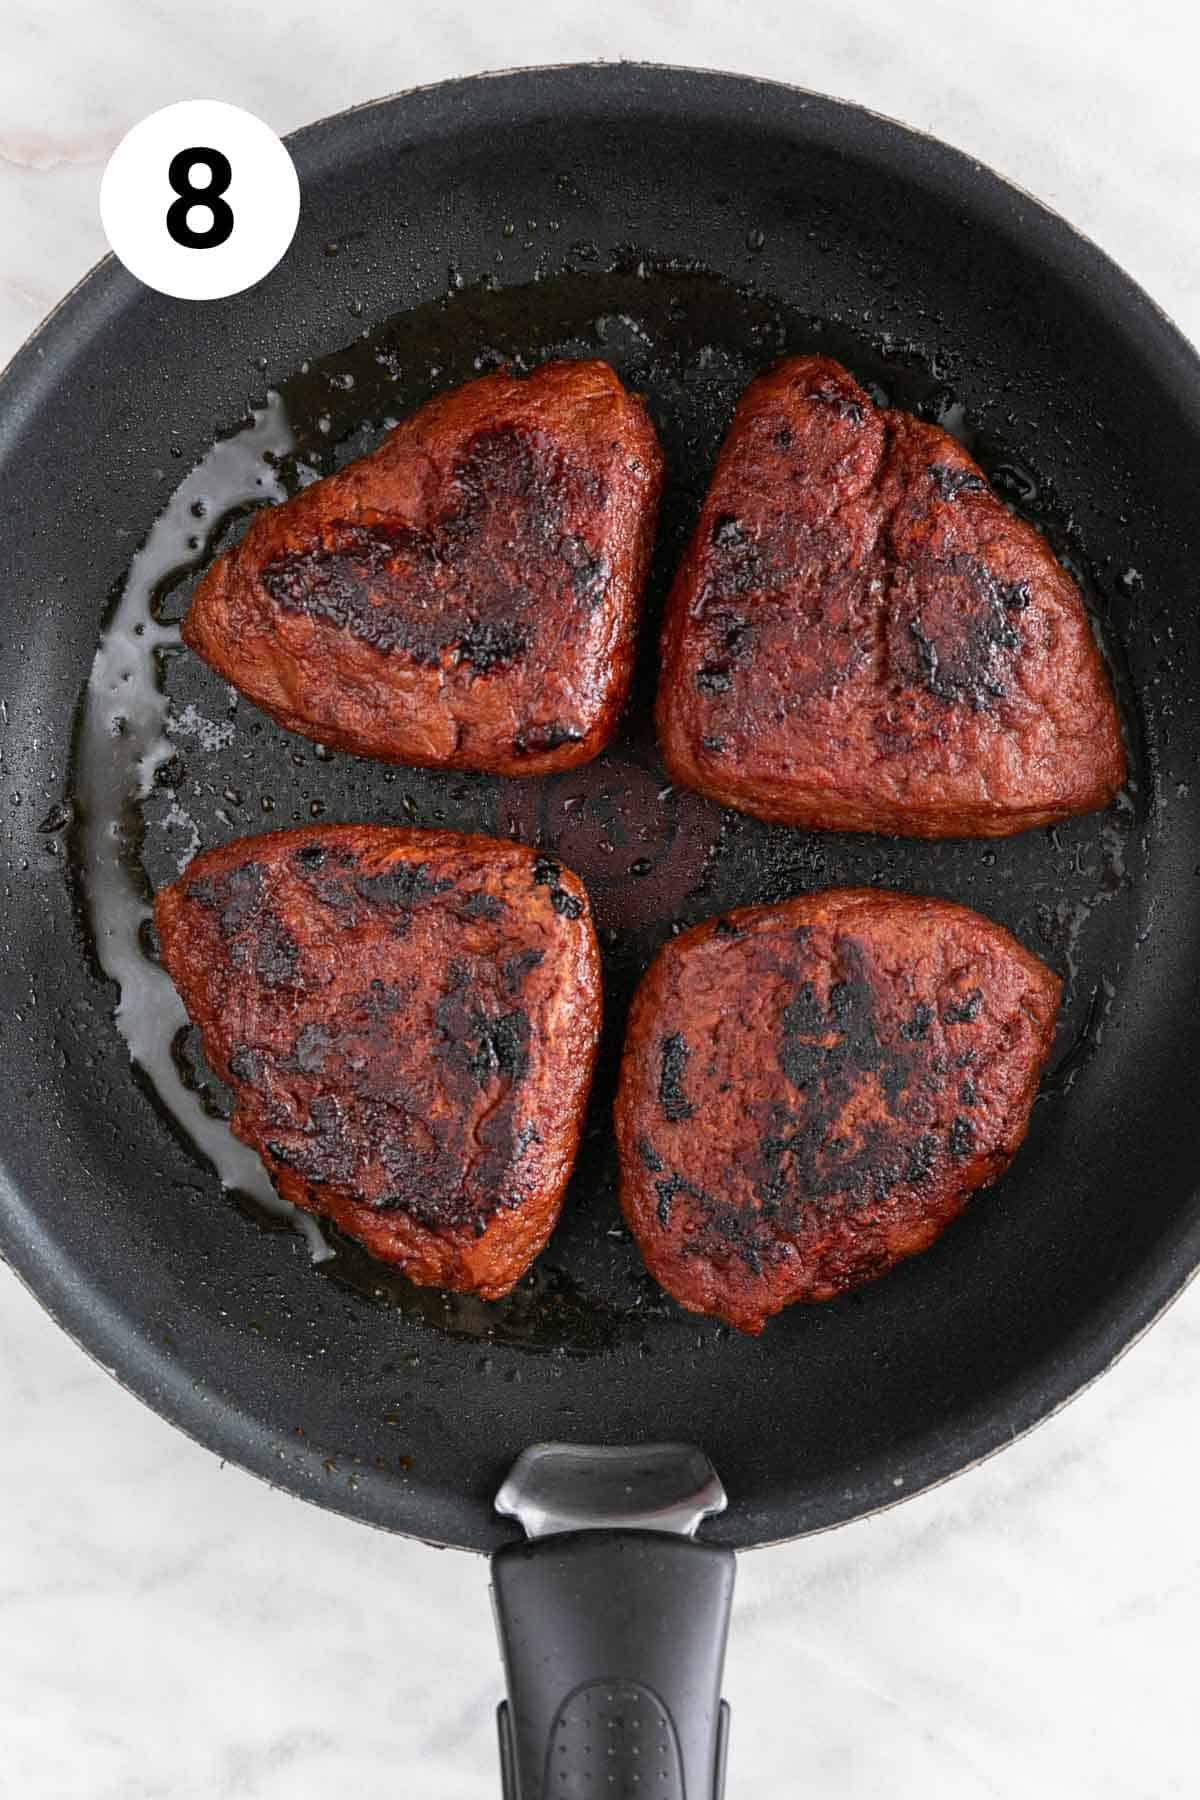 The vegan steaks cooked in a frying pan.